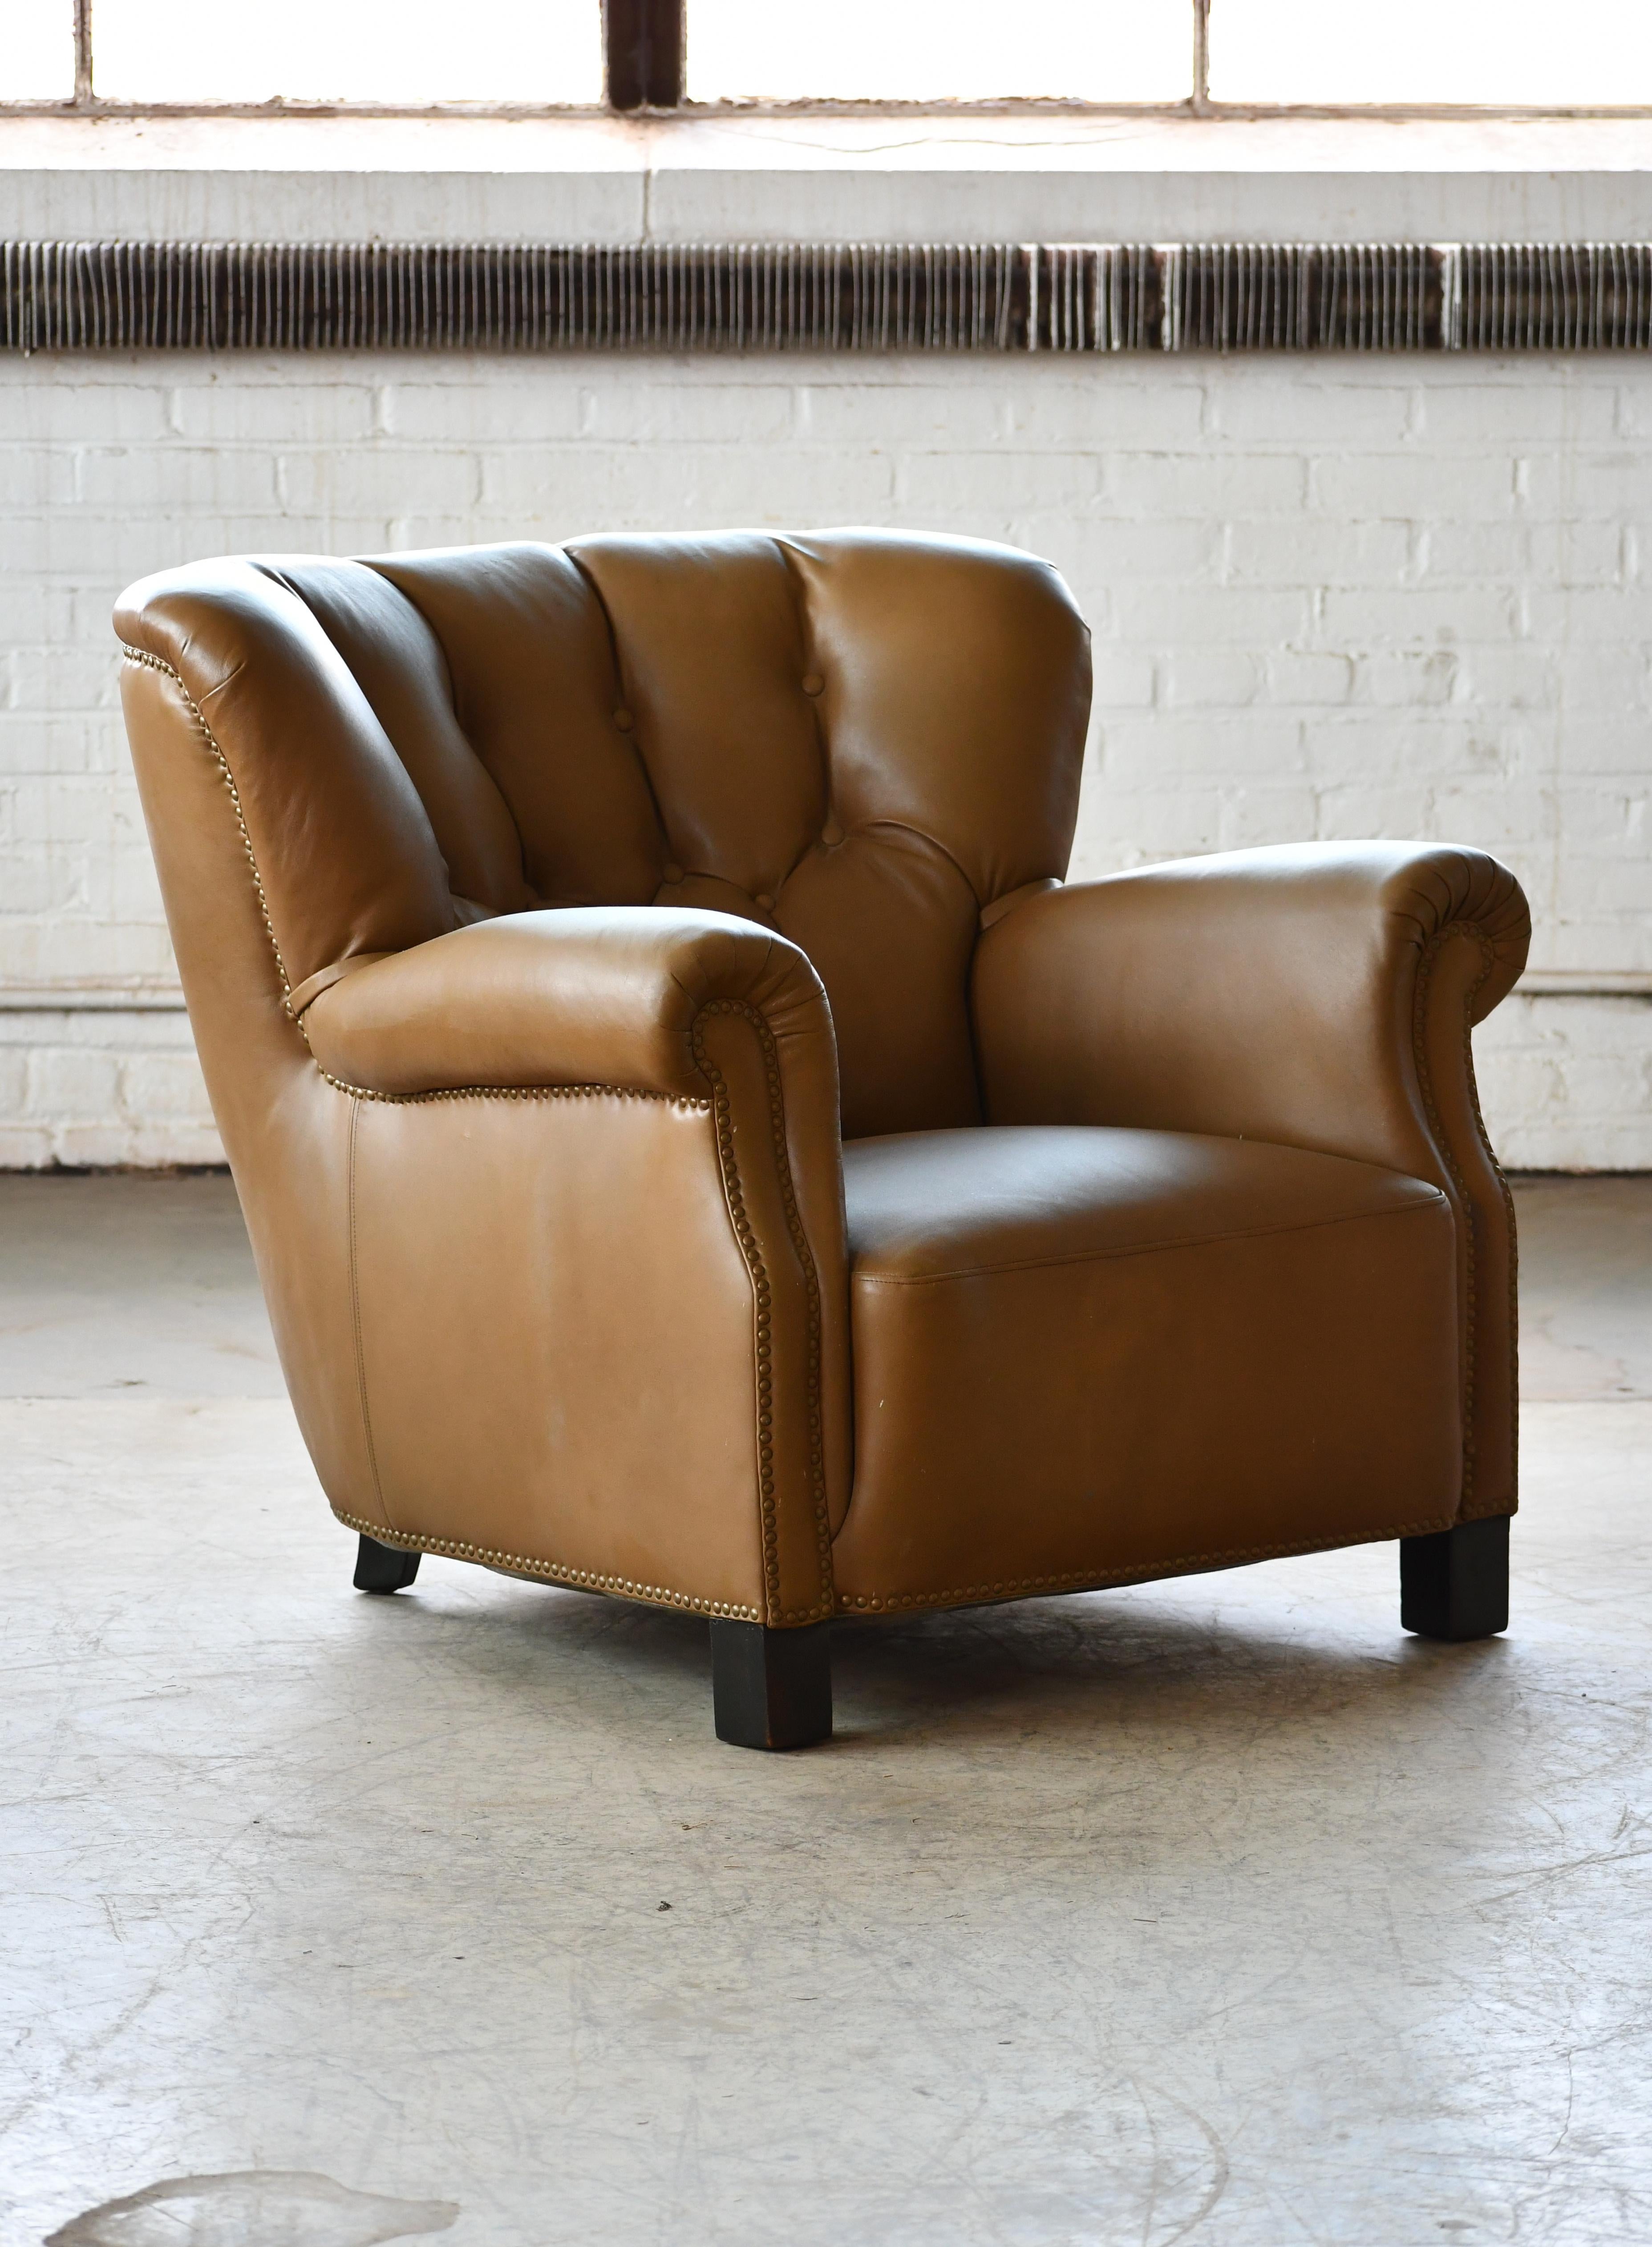 Fritz Hansen Model 1518 Large Club Chair in Olive Brown Leather, Denmark, 1940s 5